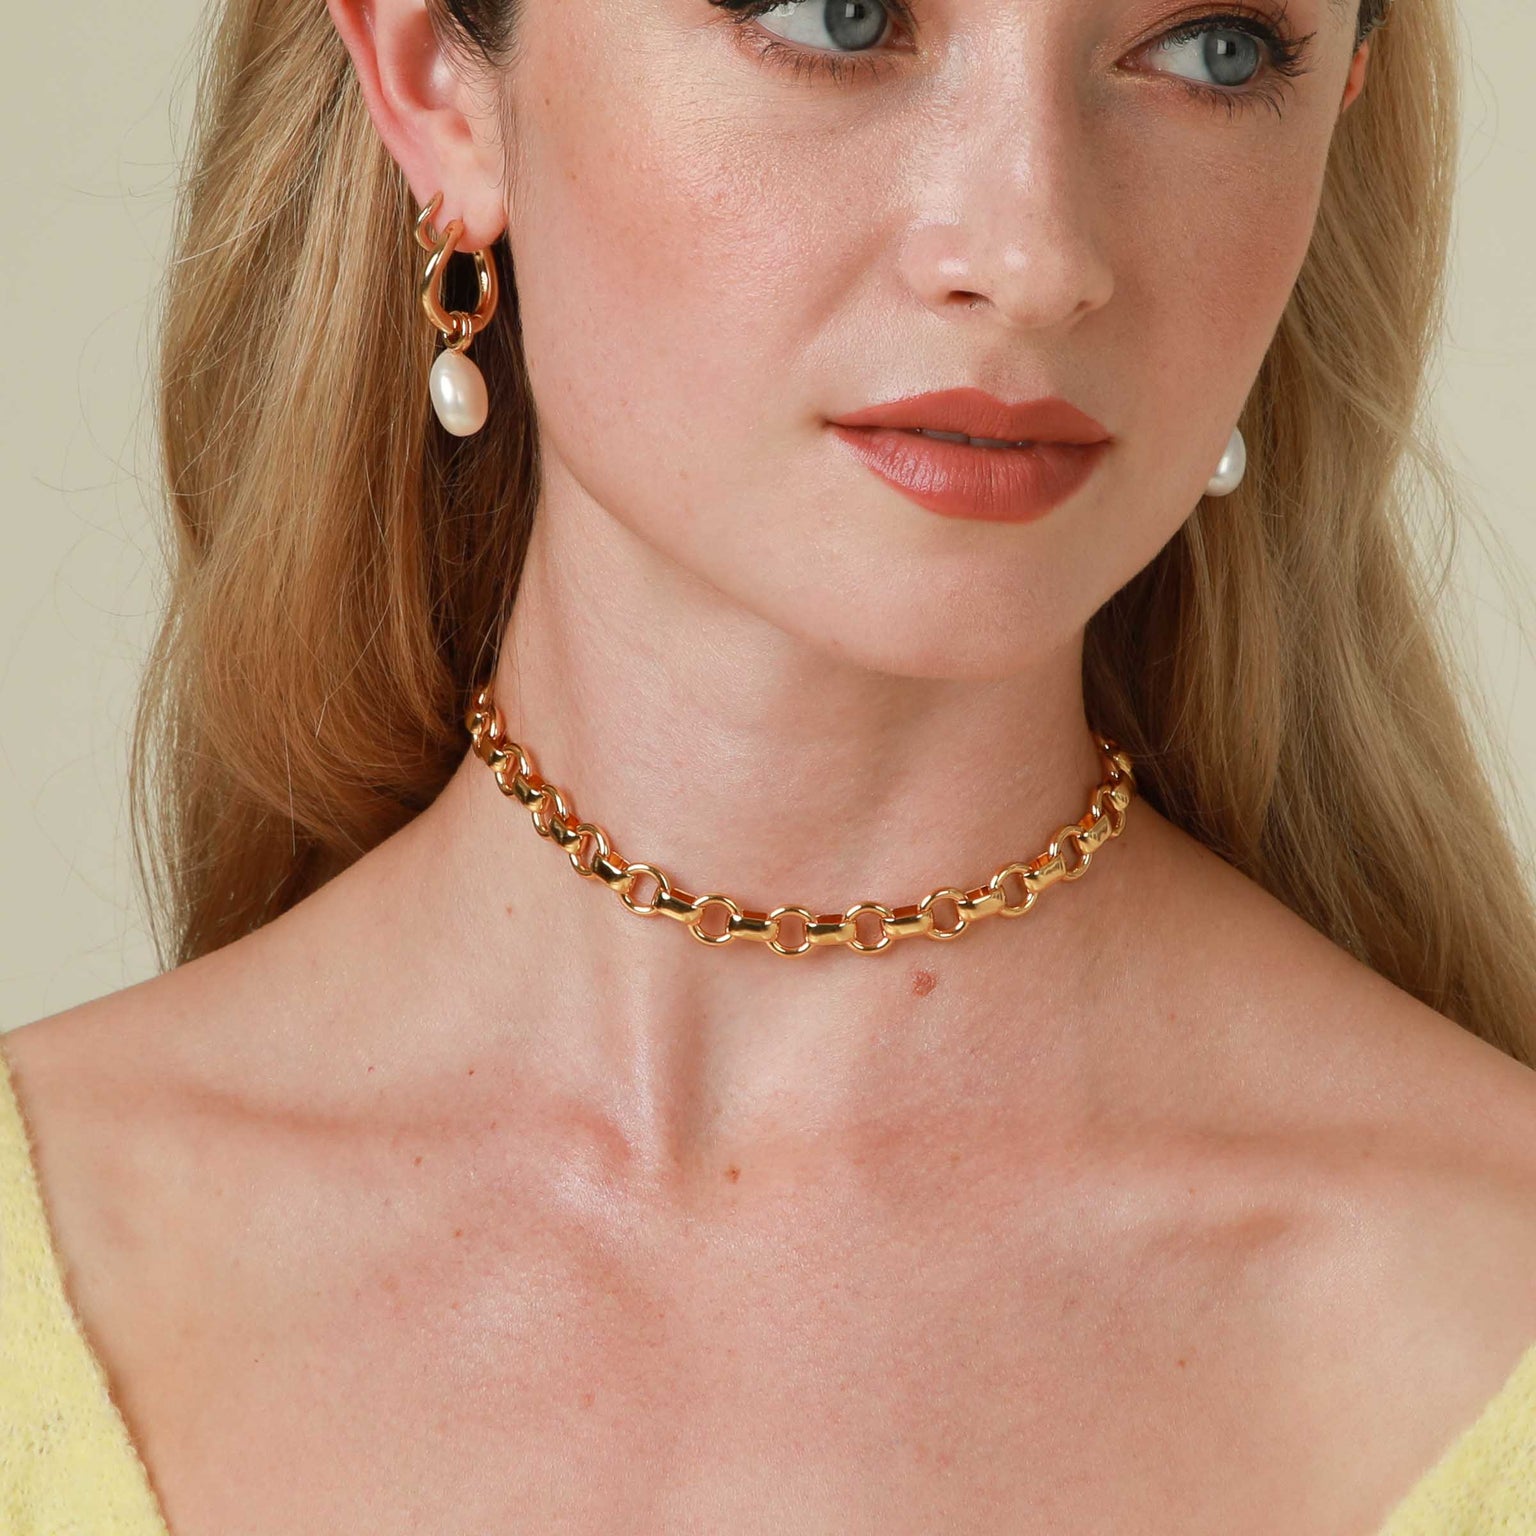 Pearl Link Chain Necklace in Gold worn